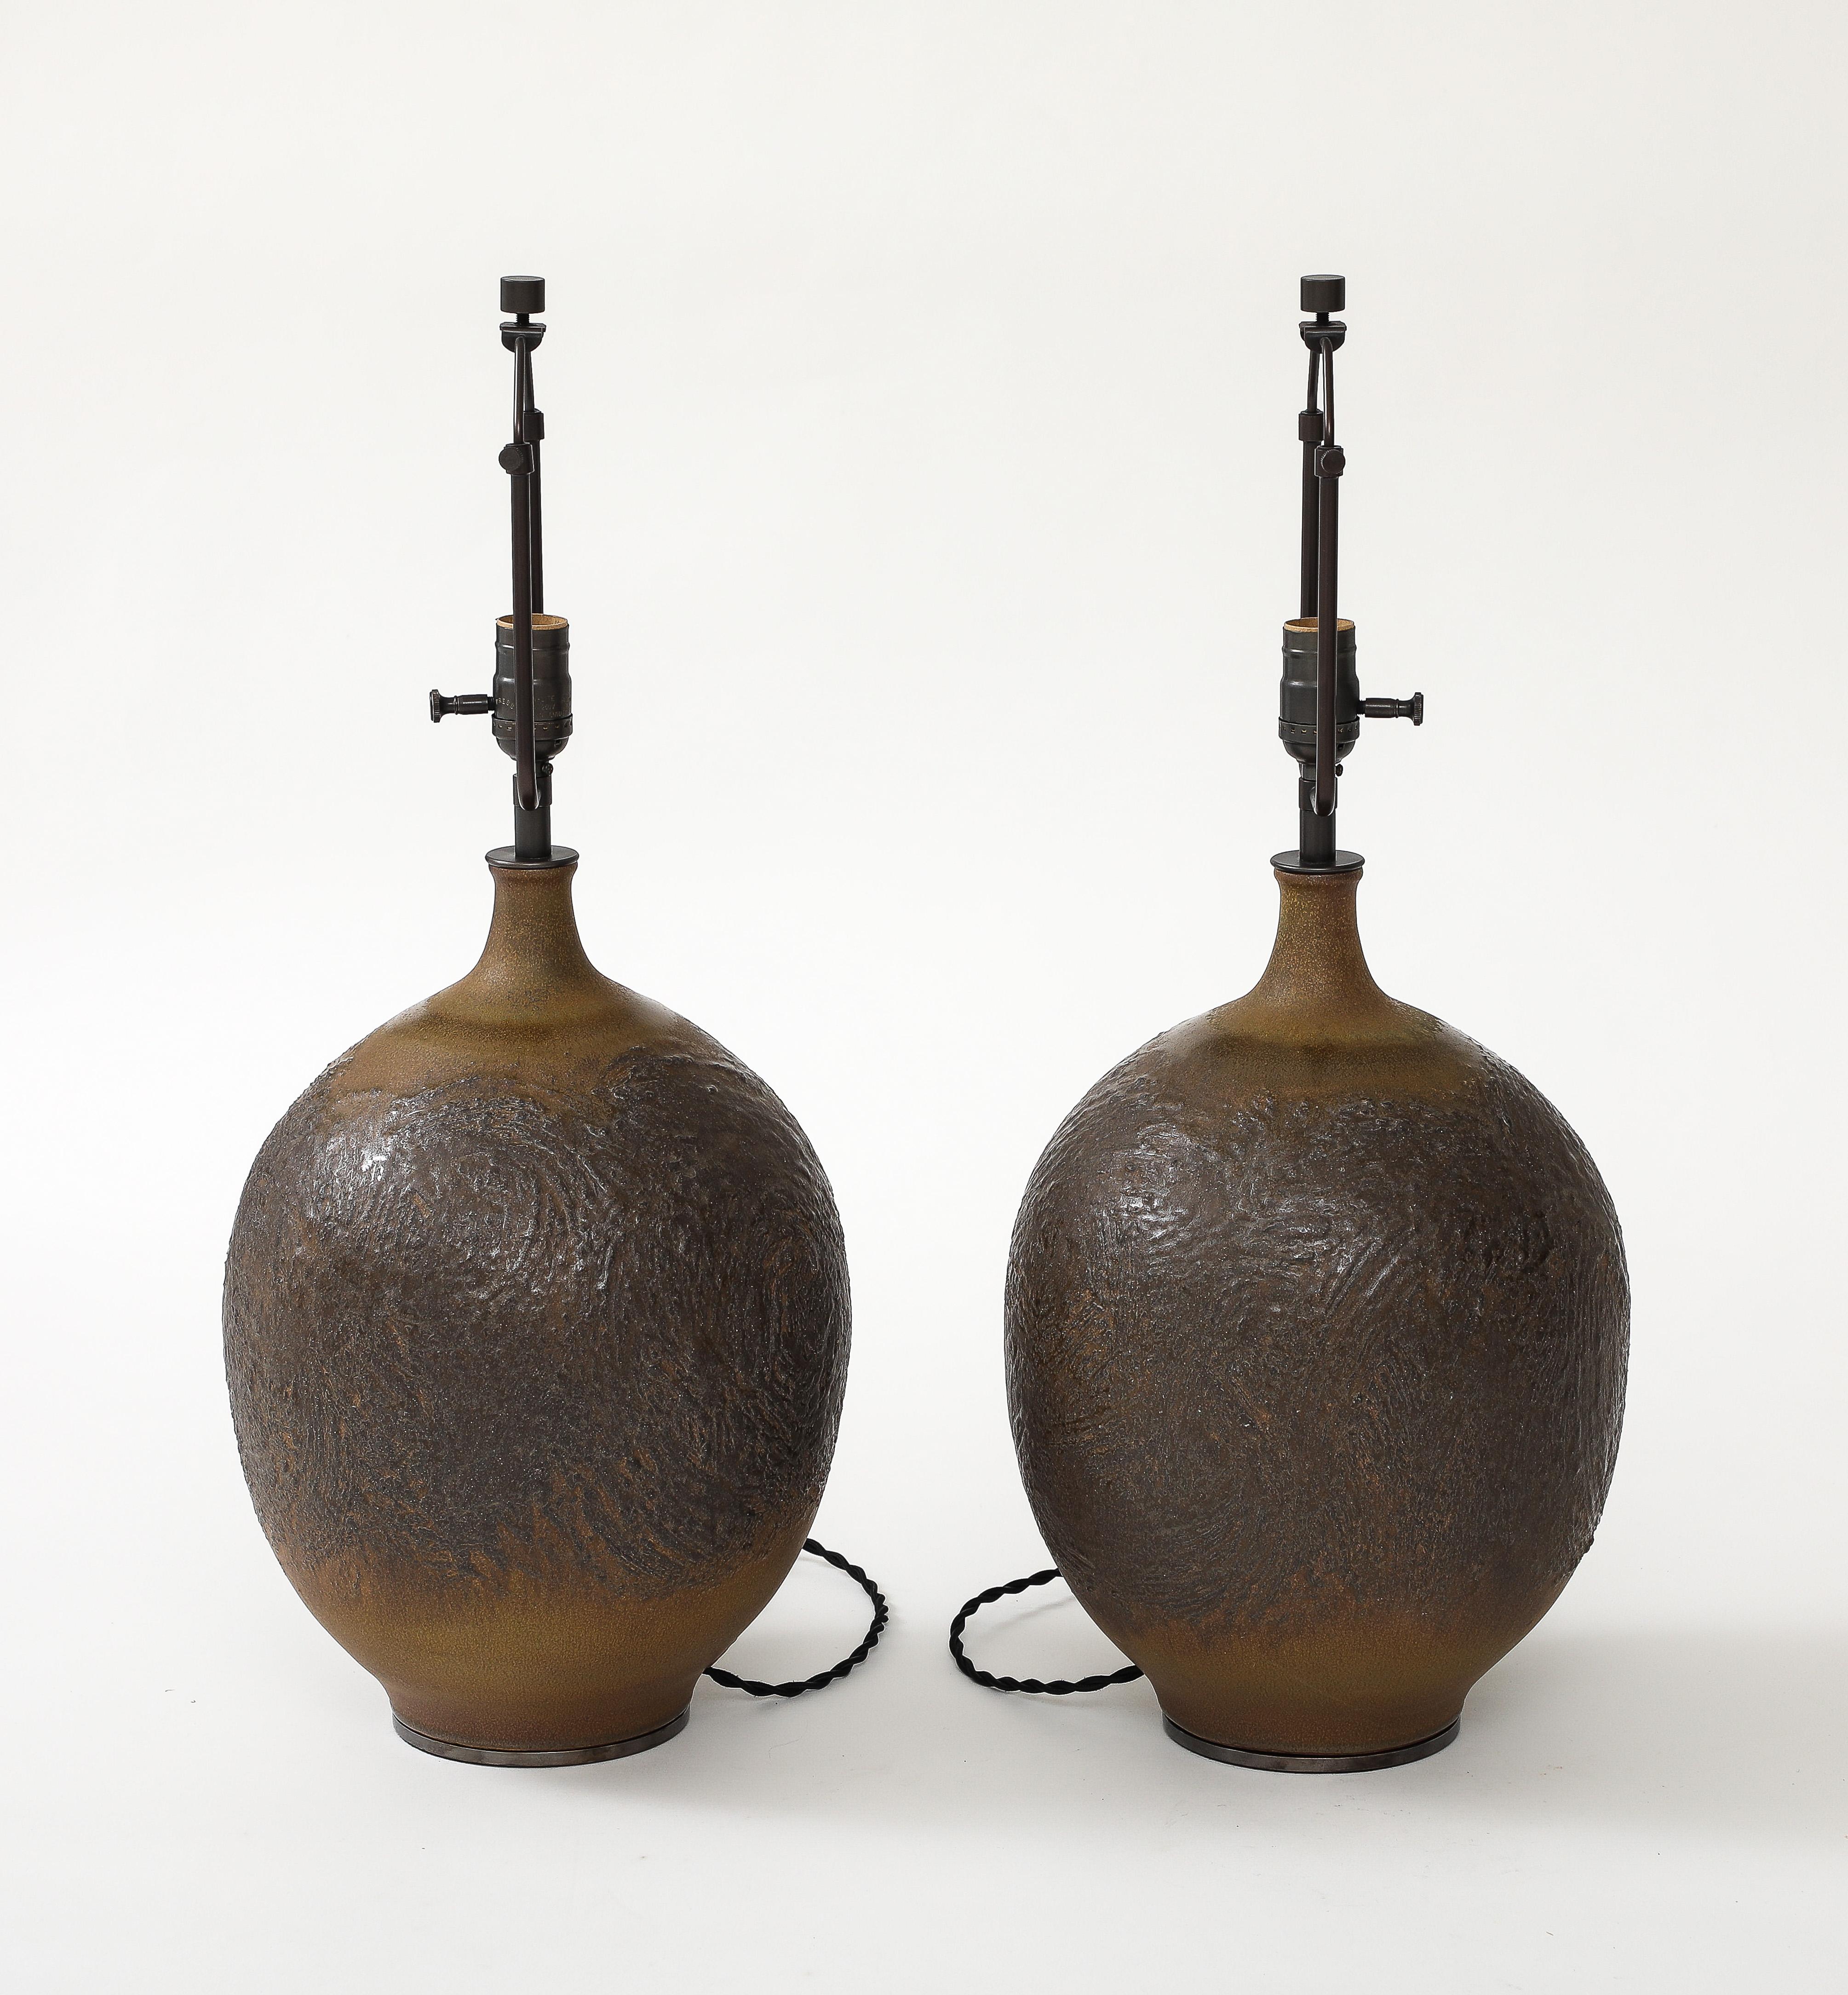 Pair of Glazed Ceramic Lamps by Design Technics, United States, c. 1950 In Excellent Condition For Sale In New York City, NY